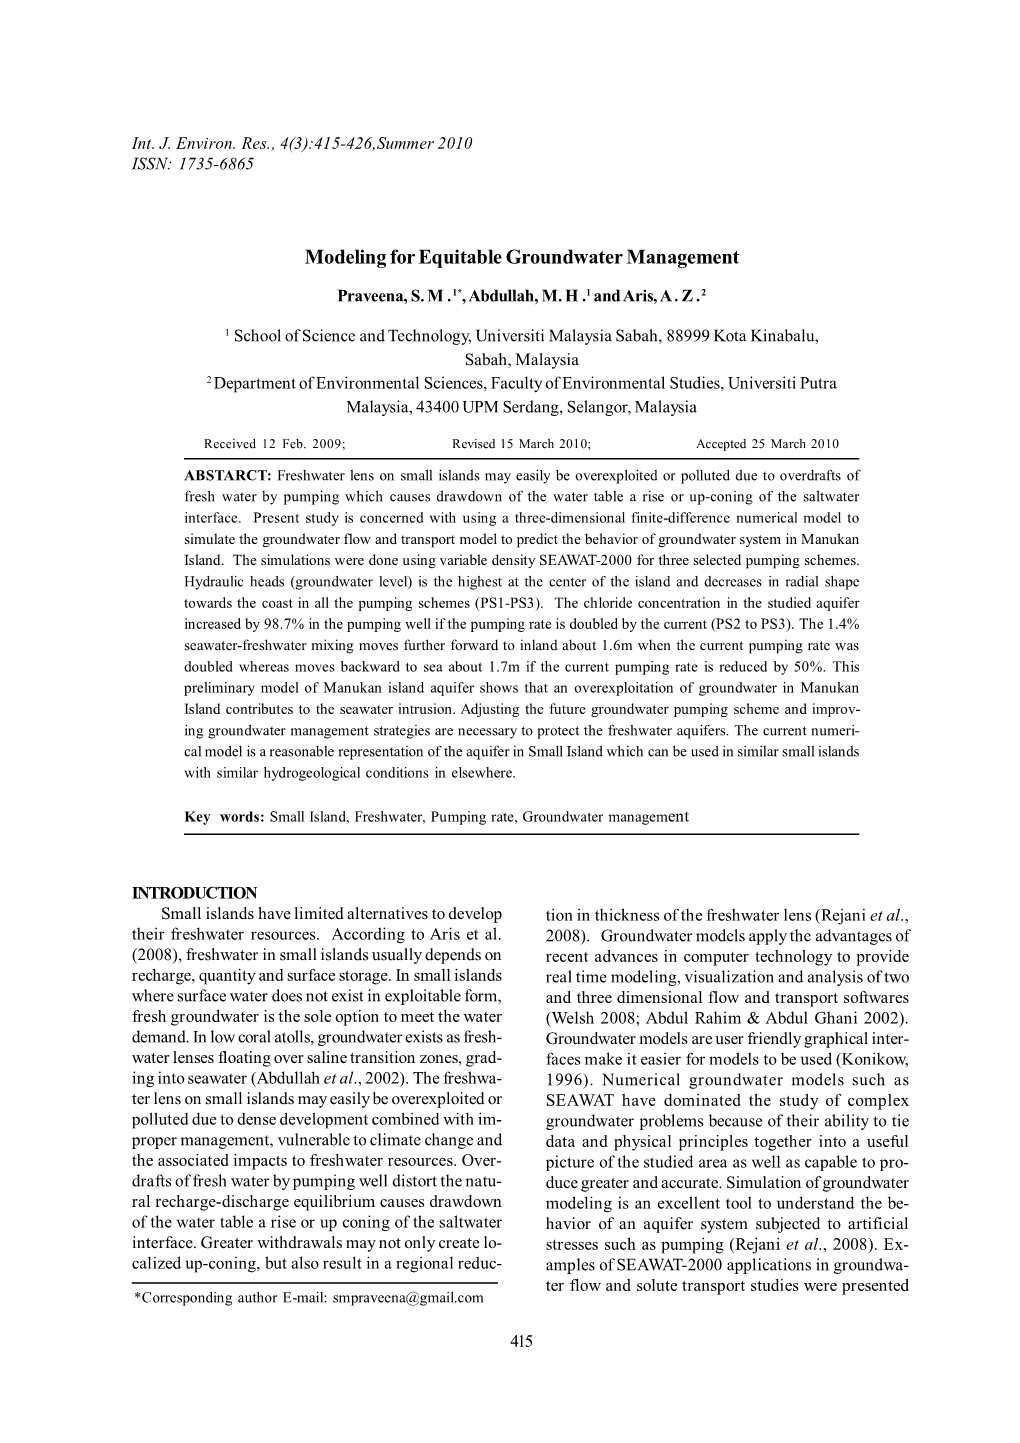 Modeling for Equitable Groundwater Management